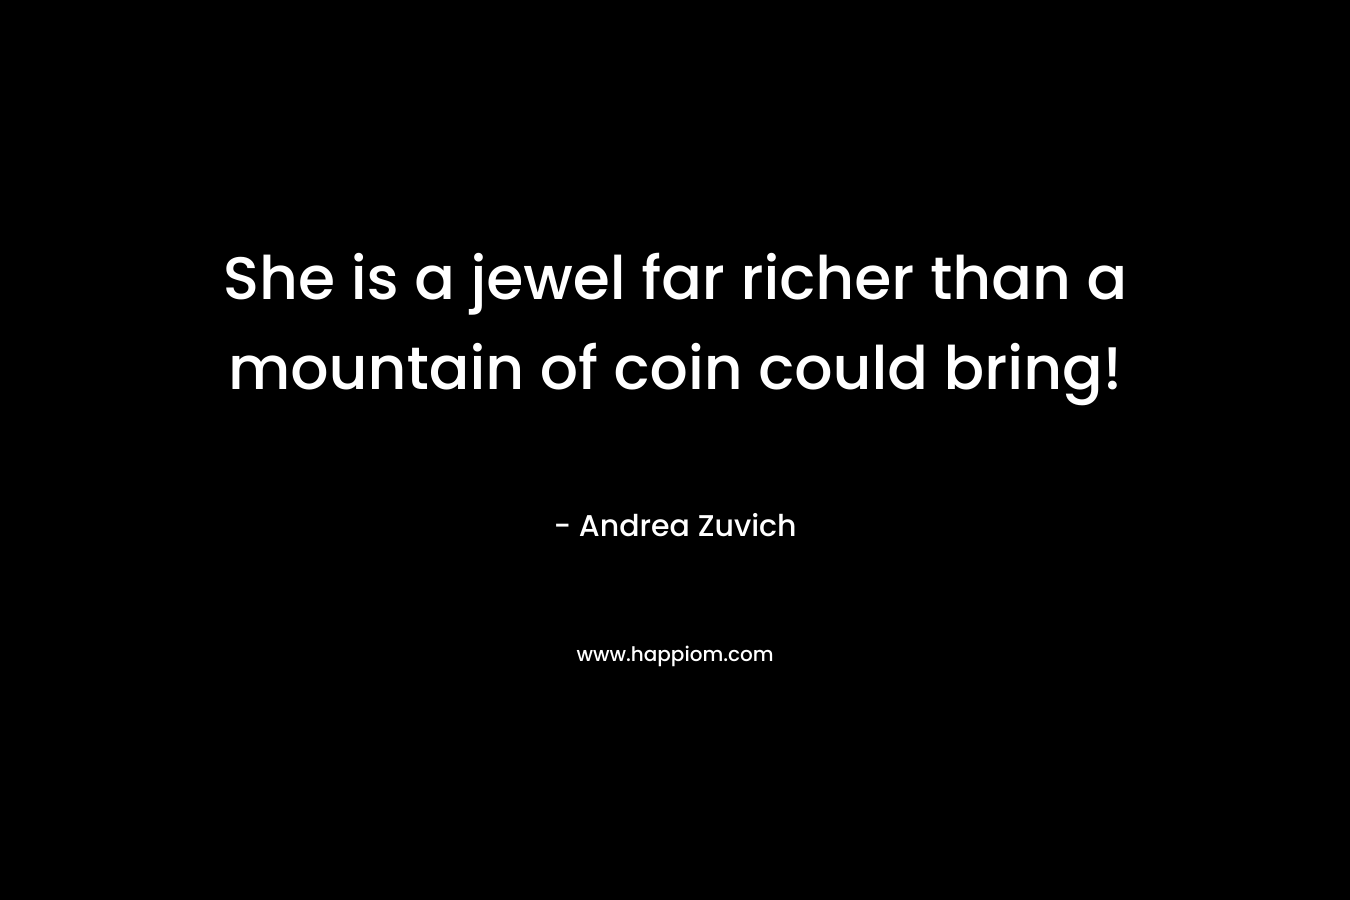 She is a jewel far richer than a mountain of coin could bring! – Andrea Zuvich